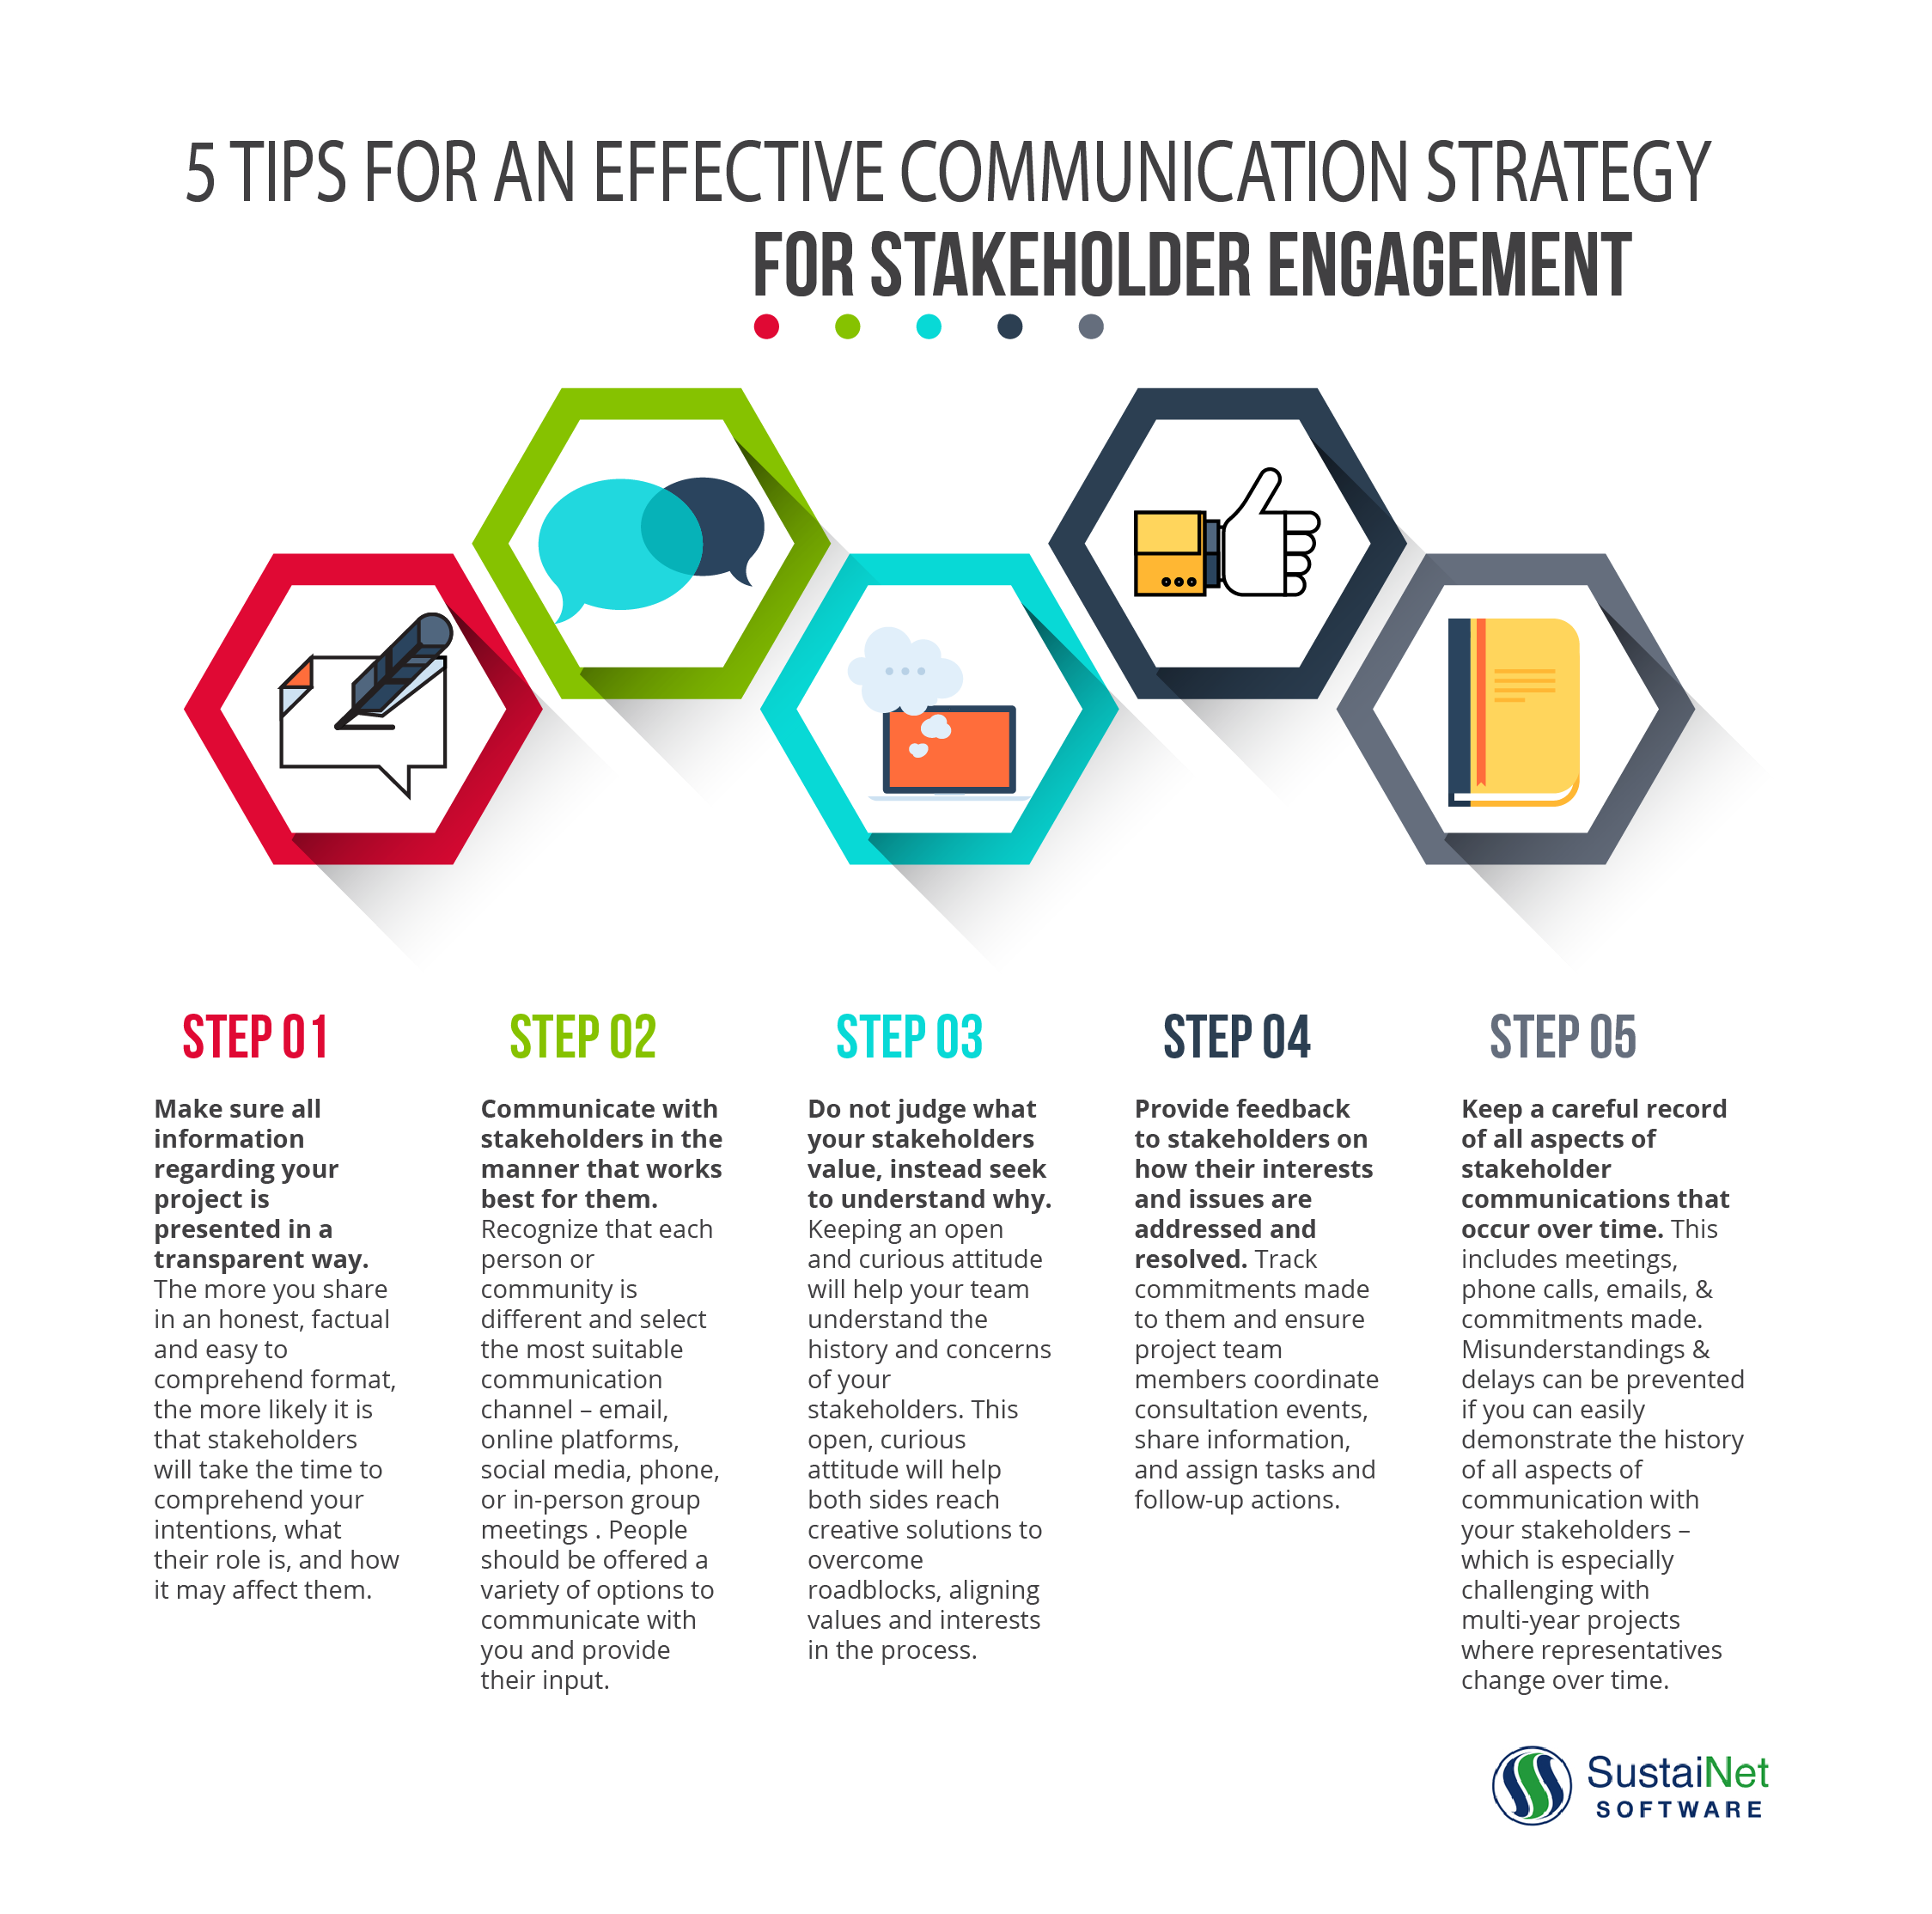 Communication Strategy for Stakeholder Engagement